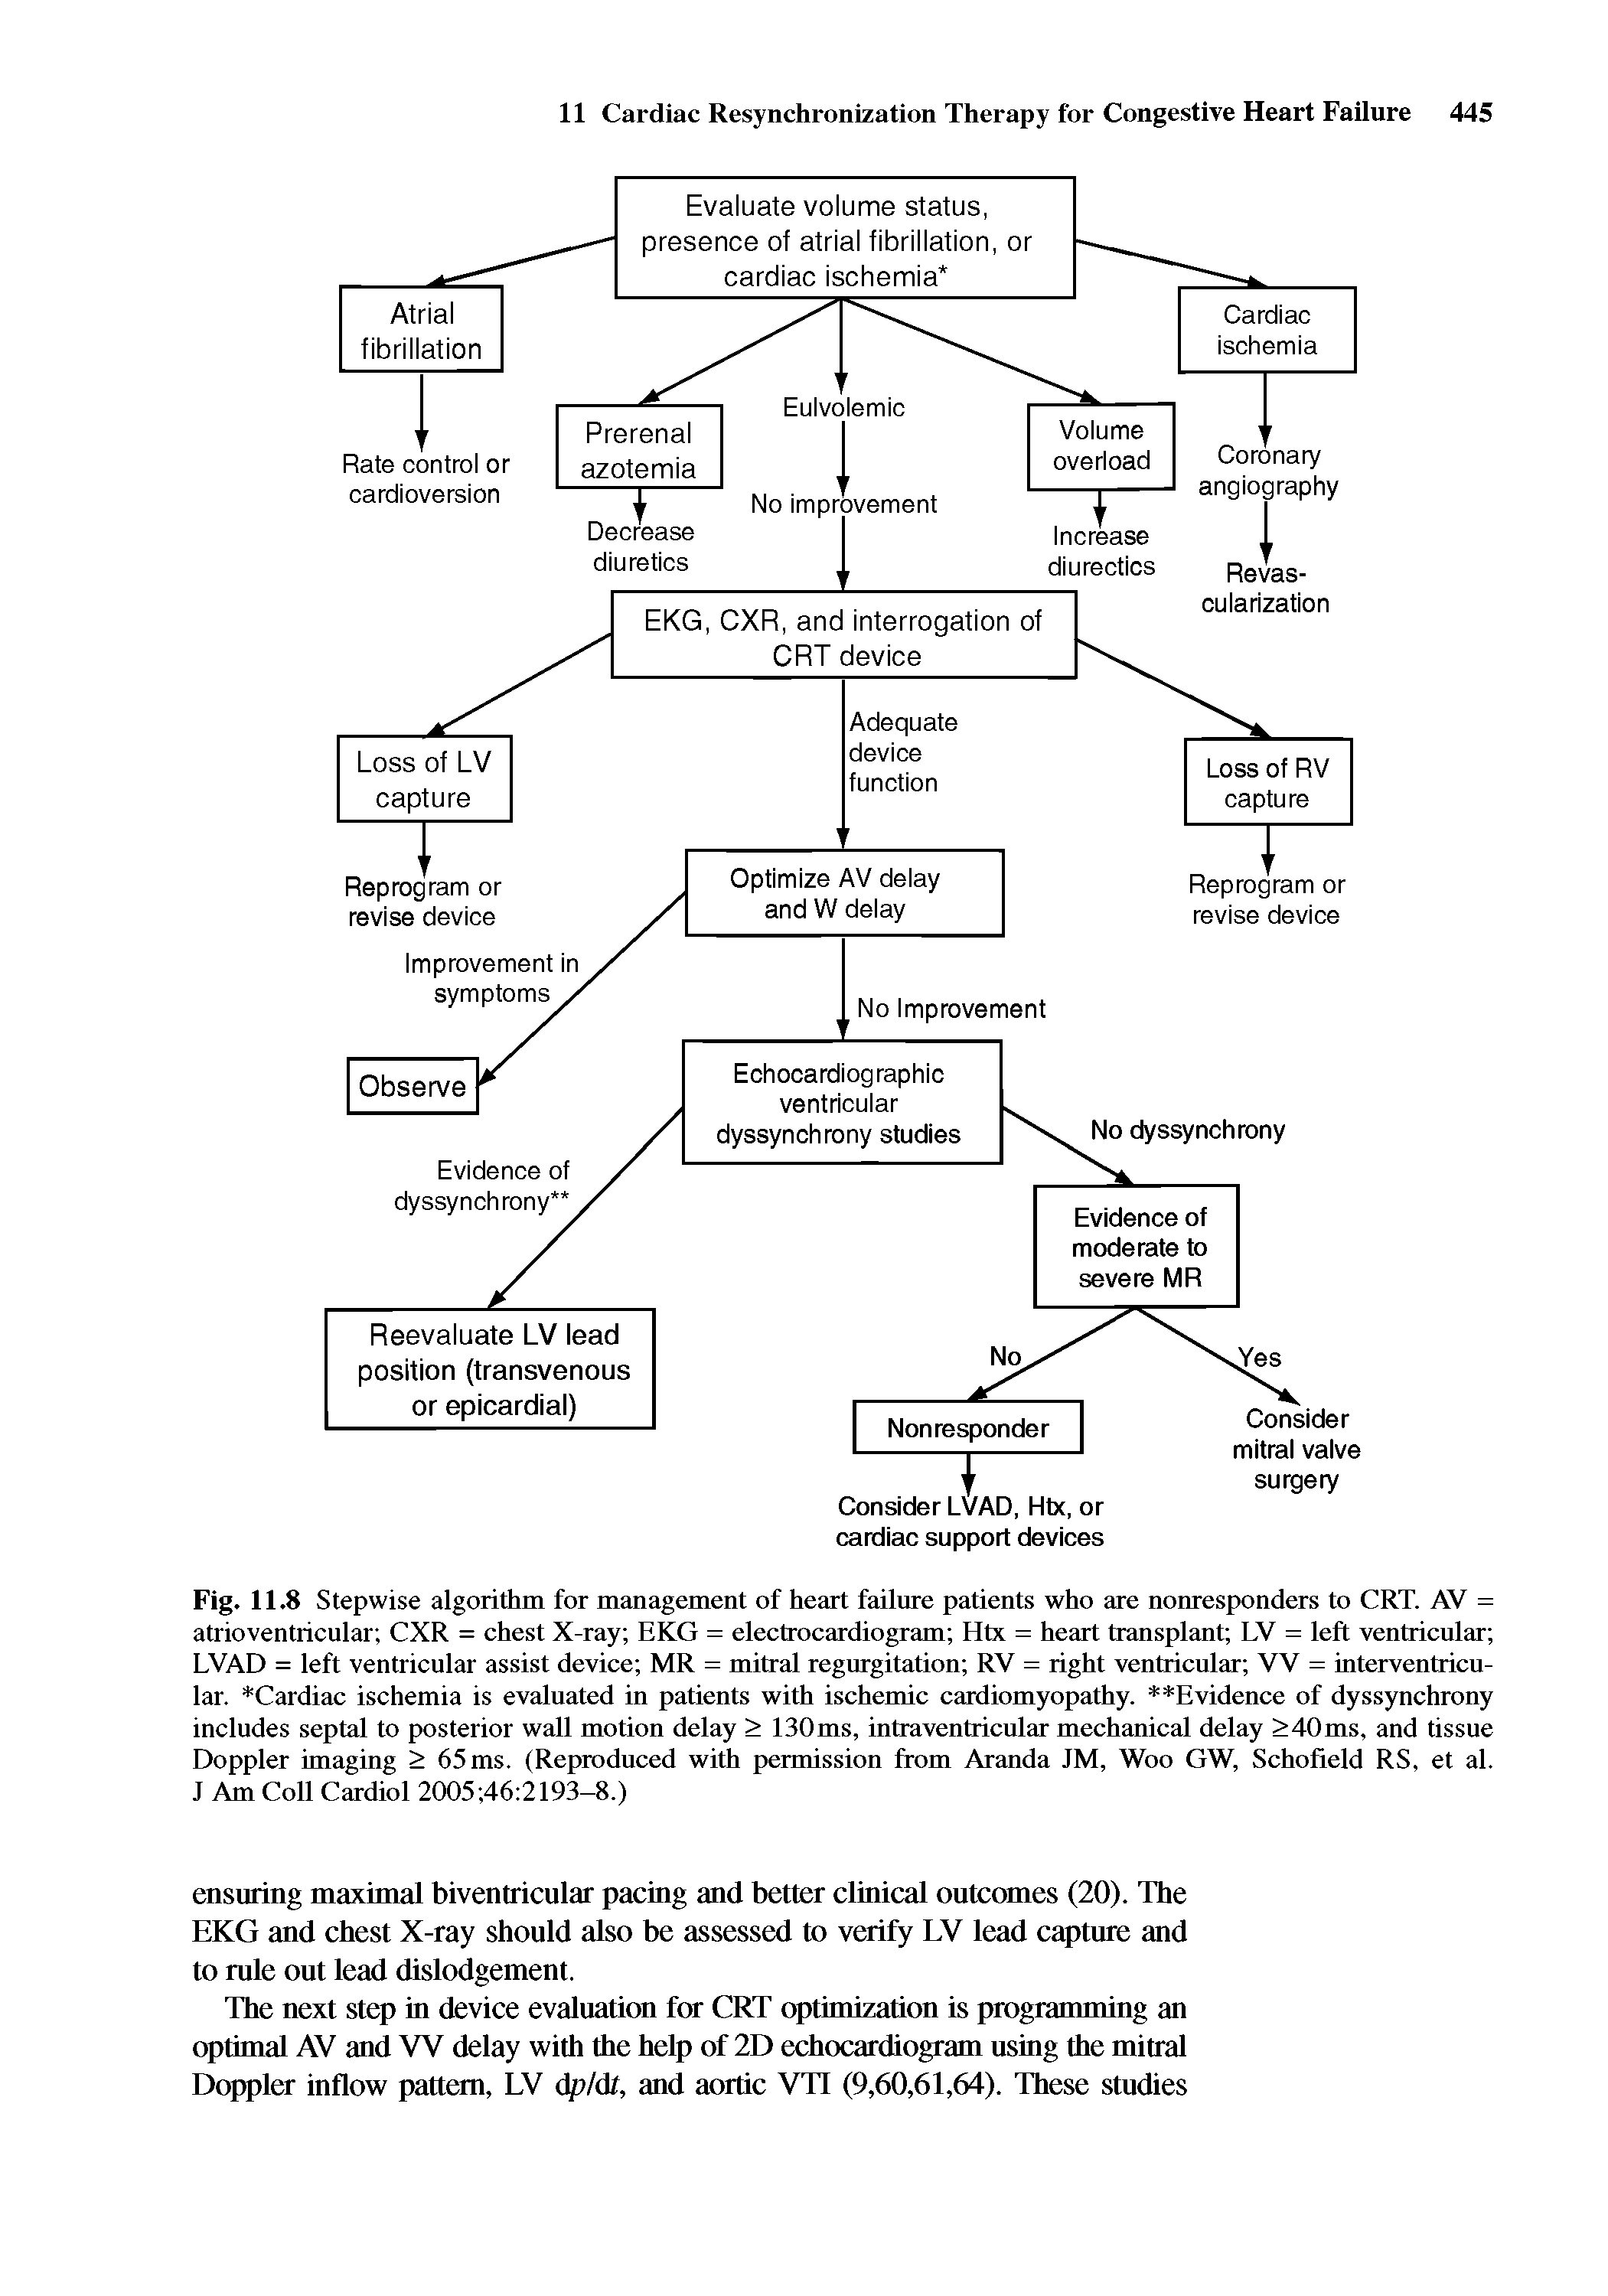 Fig. 11.8 Stepwise algorithm for management of heart failure patients who are nonresponders to CRT. AV = atrioventricular CXR = chest X-ray EKG = electrocardiogram Htx = heart transplant LV = left ventricular LVAD = left ventricular assist device MR = mitral regurgitation RV = right ventricular VV = interventricular. Cardiac ischemia is evaluated in patients with ischemic cardiomyopathy. Evidence of dyssynchrony includes septal to posterior wall motion delay > 130ms, intraventricular mechanical delay >40ms, and tissue Doppler imaging > 65 ms. (Reproduced witih permission from Aranda JM, Woo GW, Schofield RS, et al. J Am Coll Cardiol 2005 46 2193-8.)...